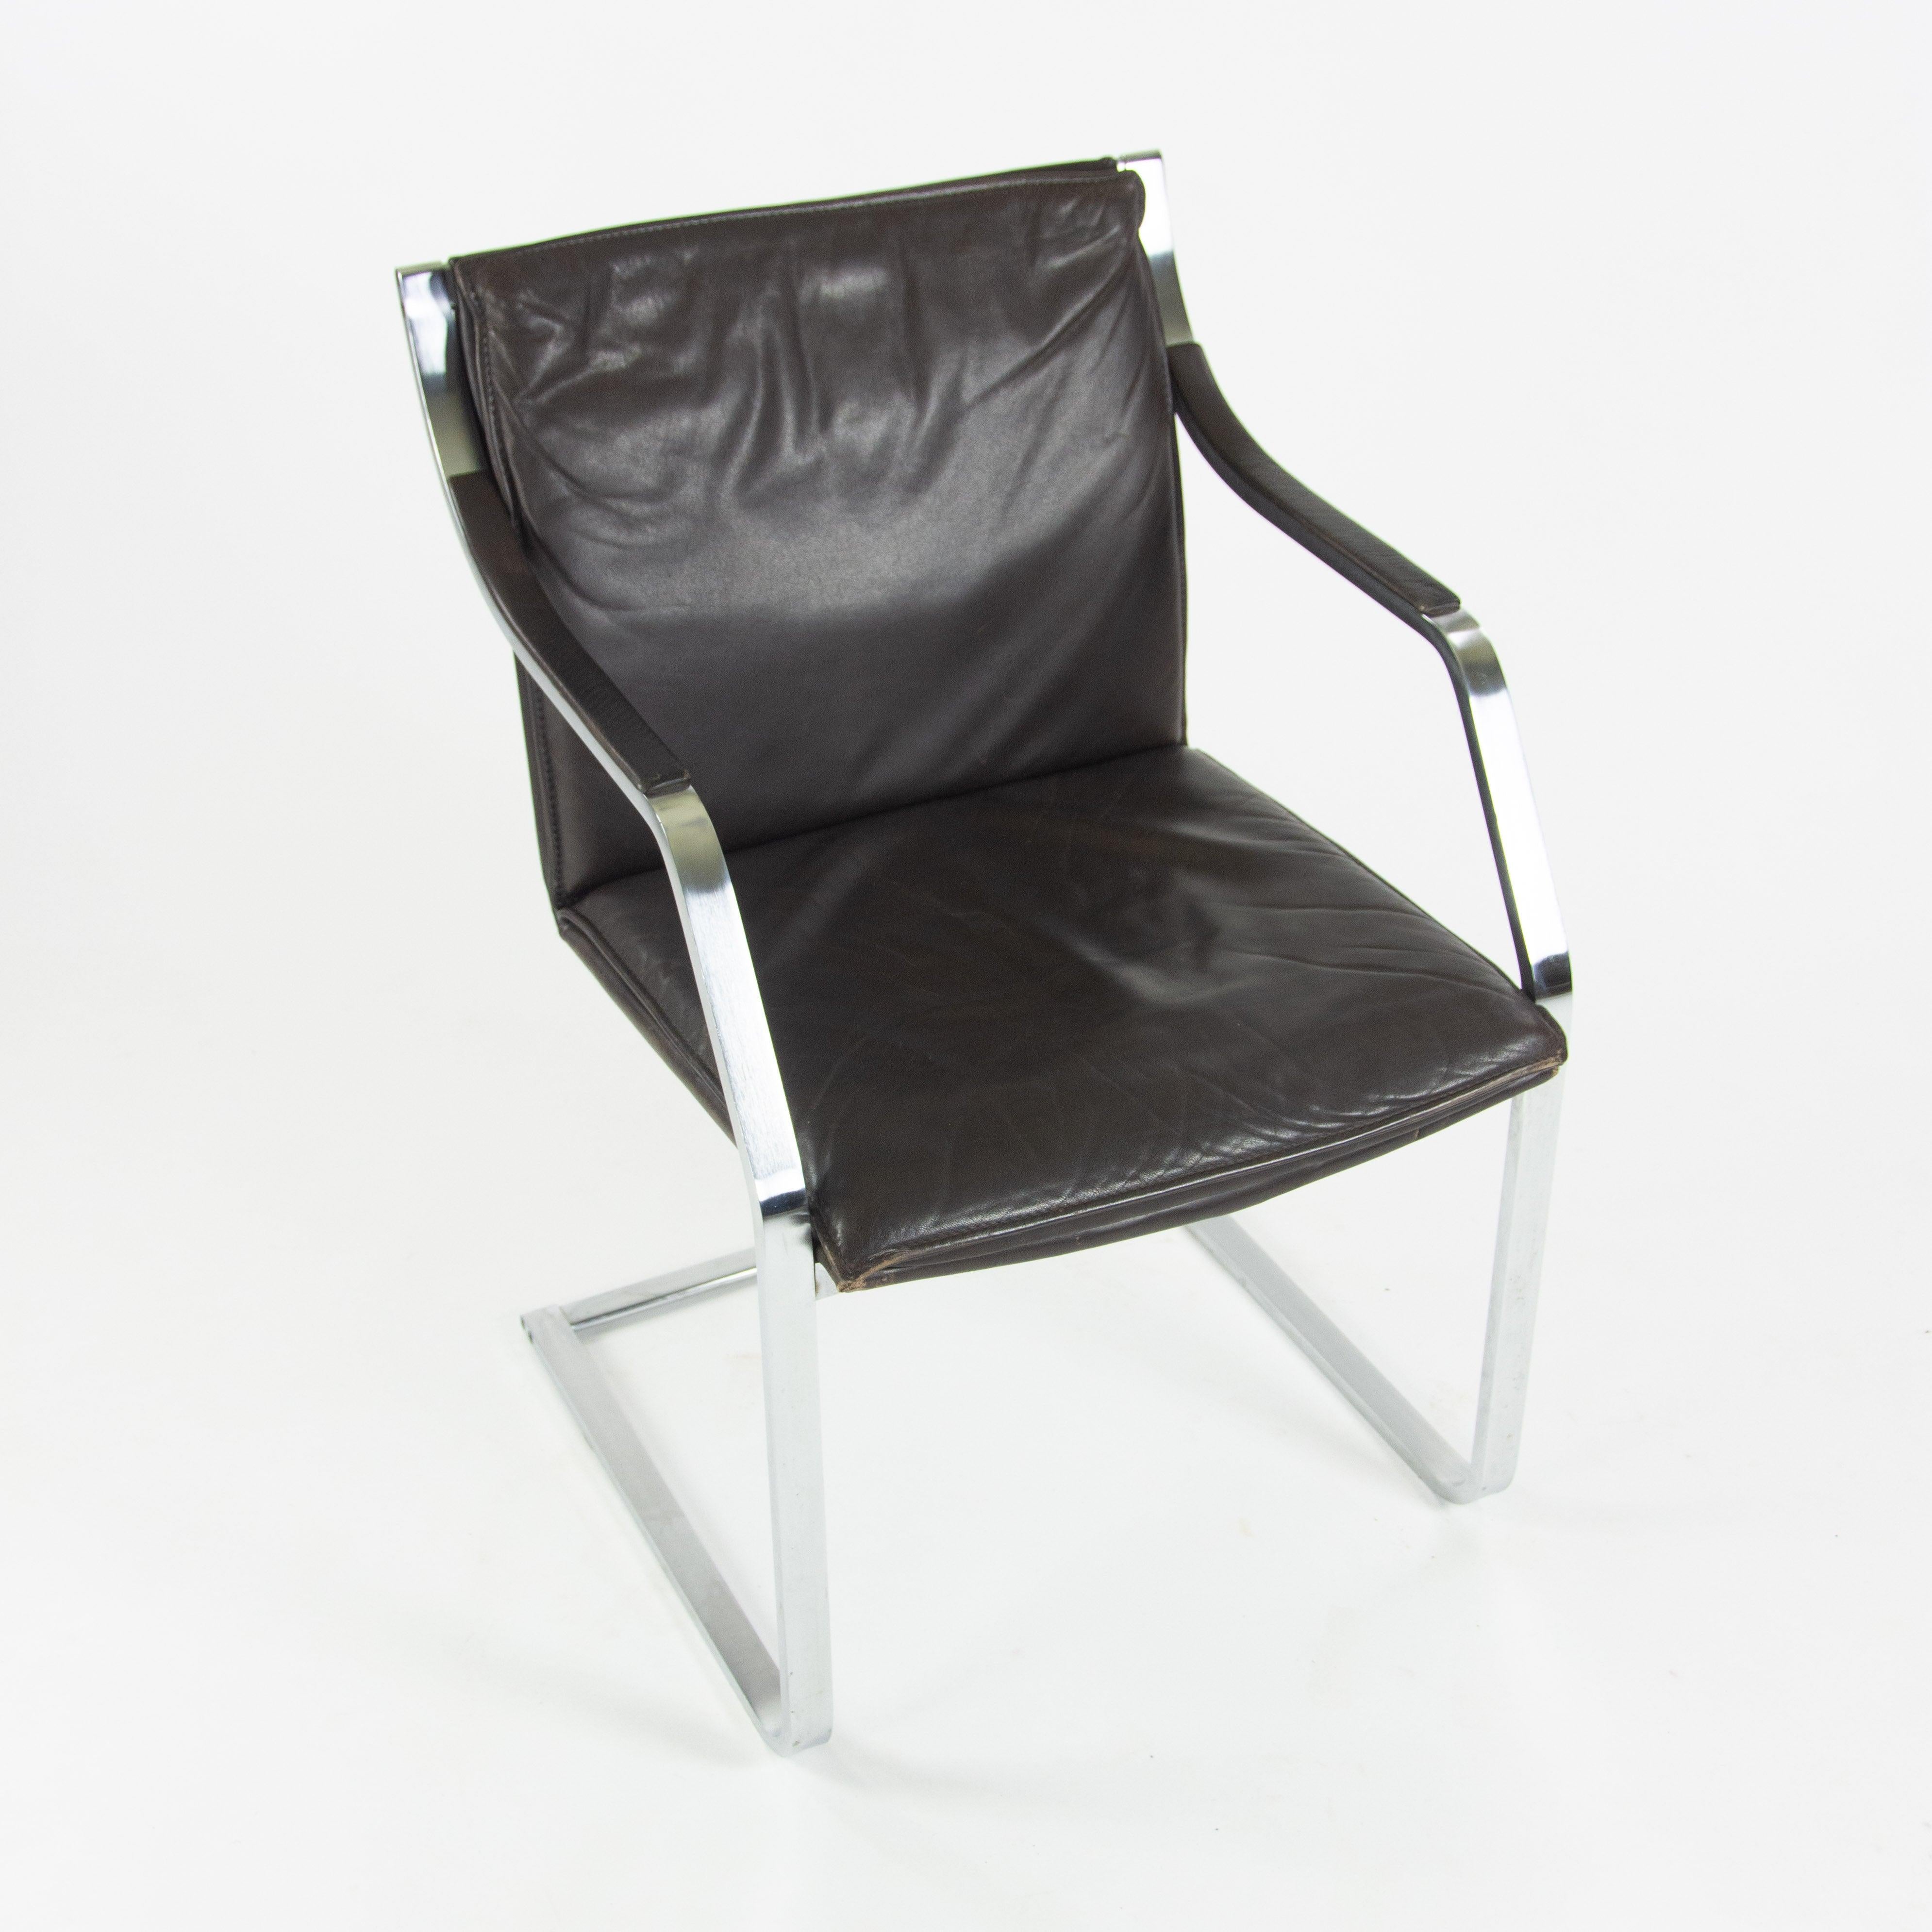 Rudolf B. Glatzel Vintage Walter Knoll Art Collection Leather & Stainless Chair For Sale 4